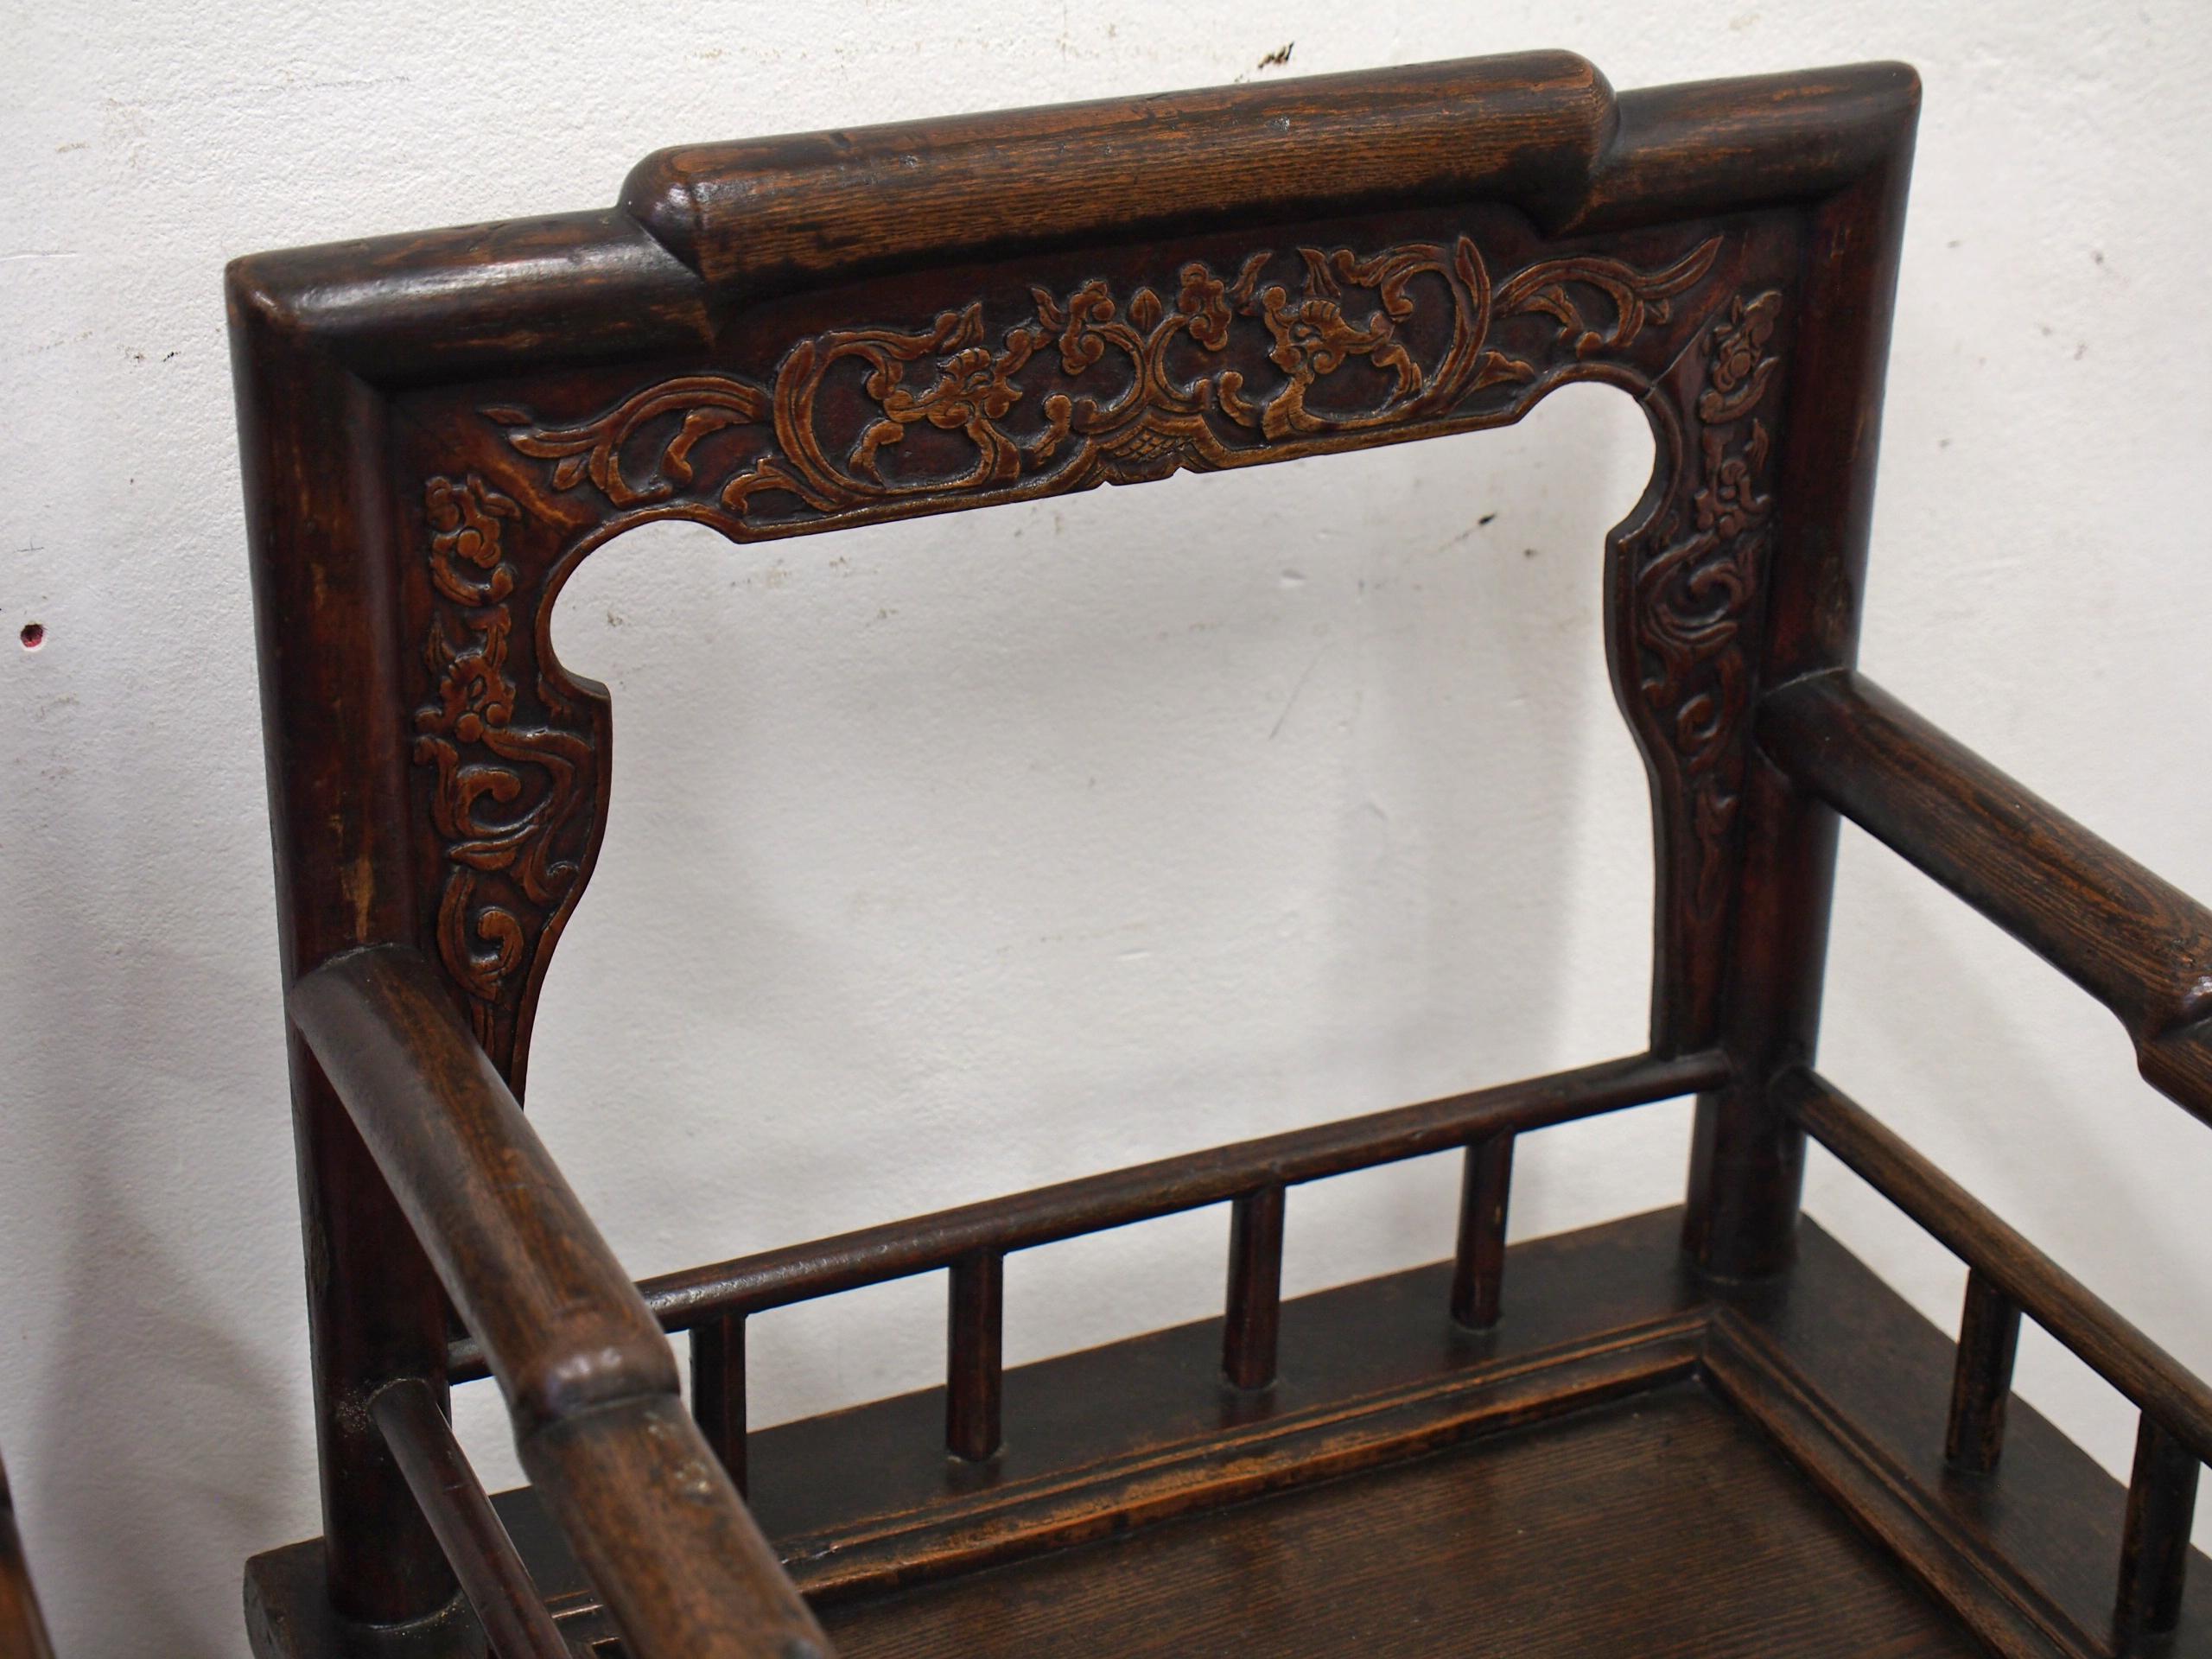 Pair of antique Chinese armchairs, circa 1850. The stepped rounded top rail leads on to rounded supports and they have an open back with floral carved moulding. The stepped rounded arms are over a lower, spindle-supported rail. With an inset panel